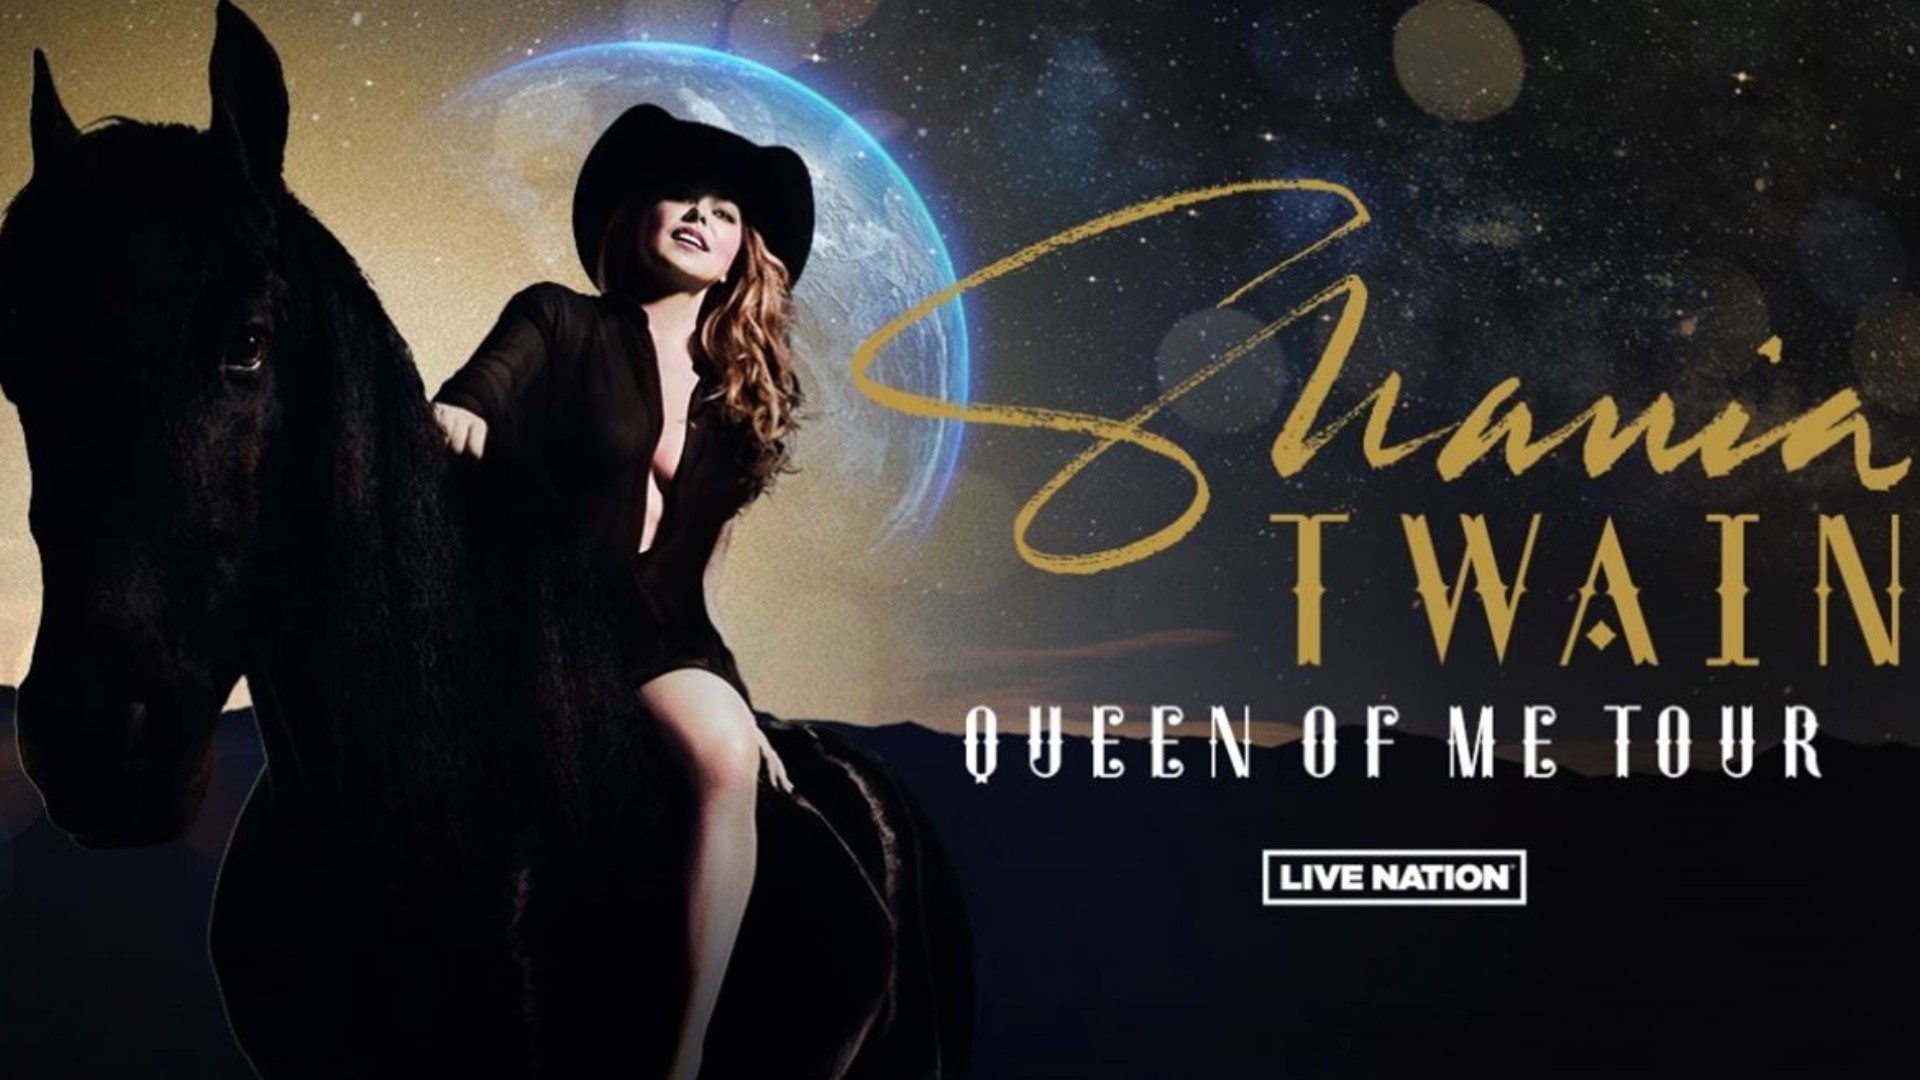 The second leg of Twain's "Queen of Me" tour starts at San Antonio's AT&T Center on Oct. 12, followed by her concert at Dickies Arena in Fort Worth on Oct. 13.